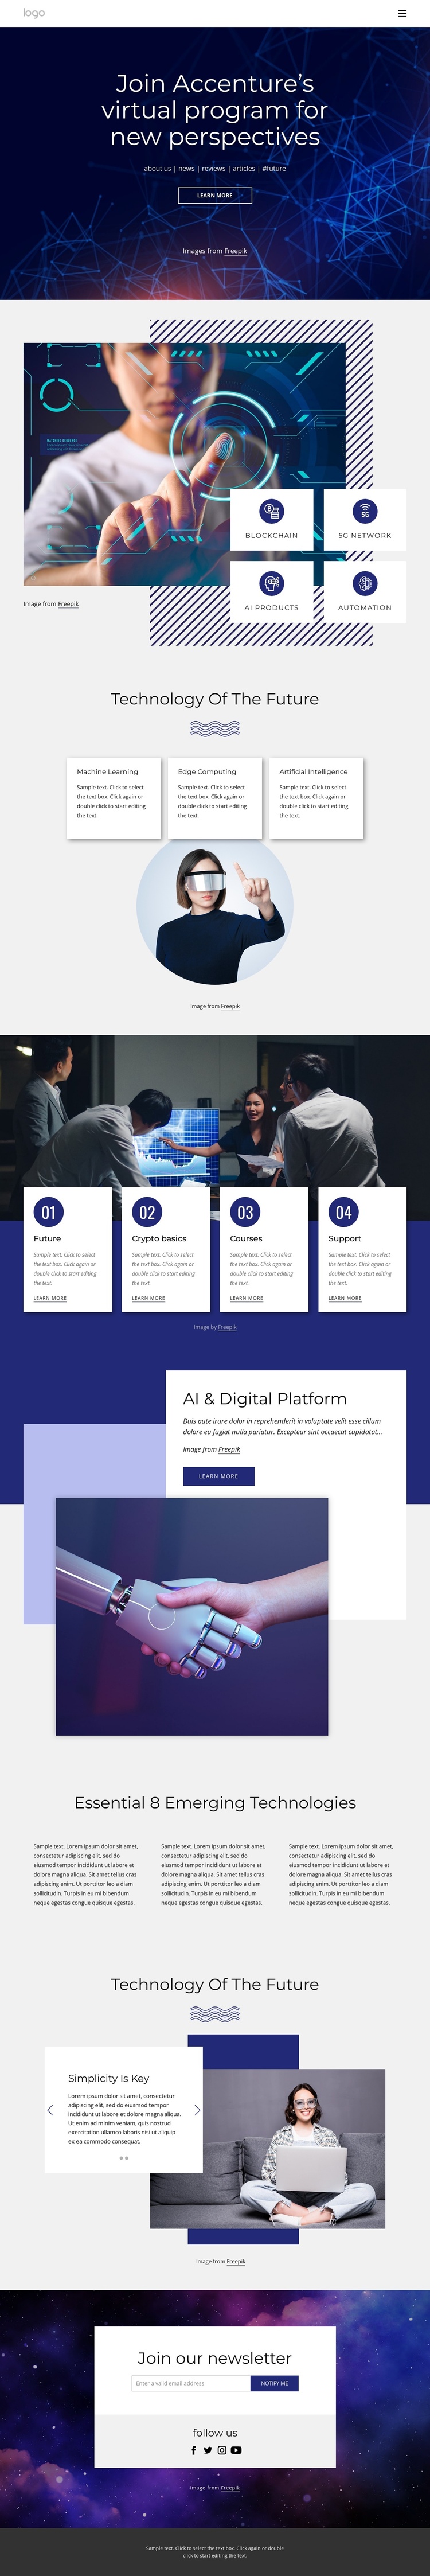 New technology perspectives Joomla Template